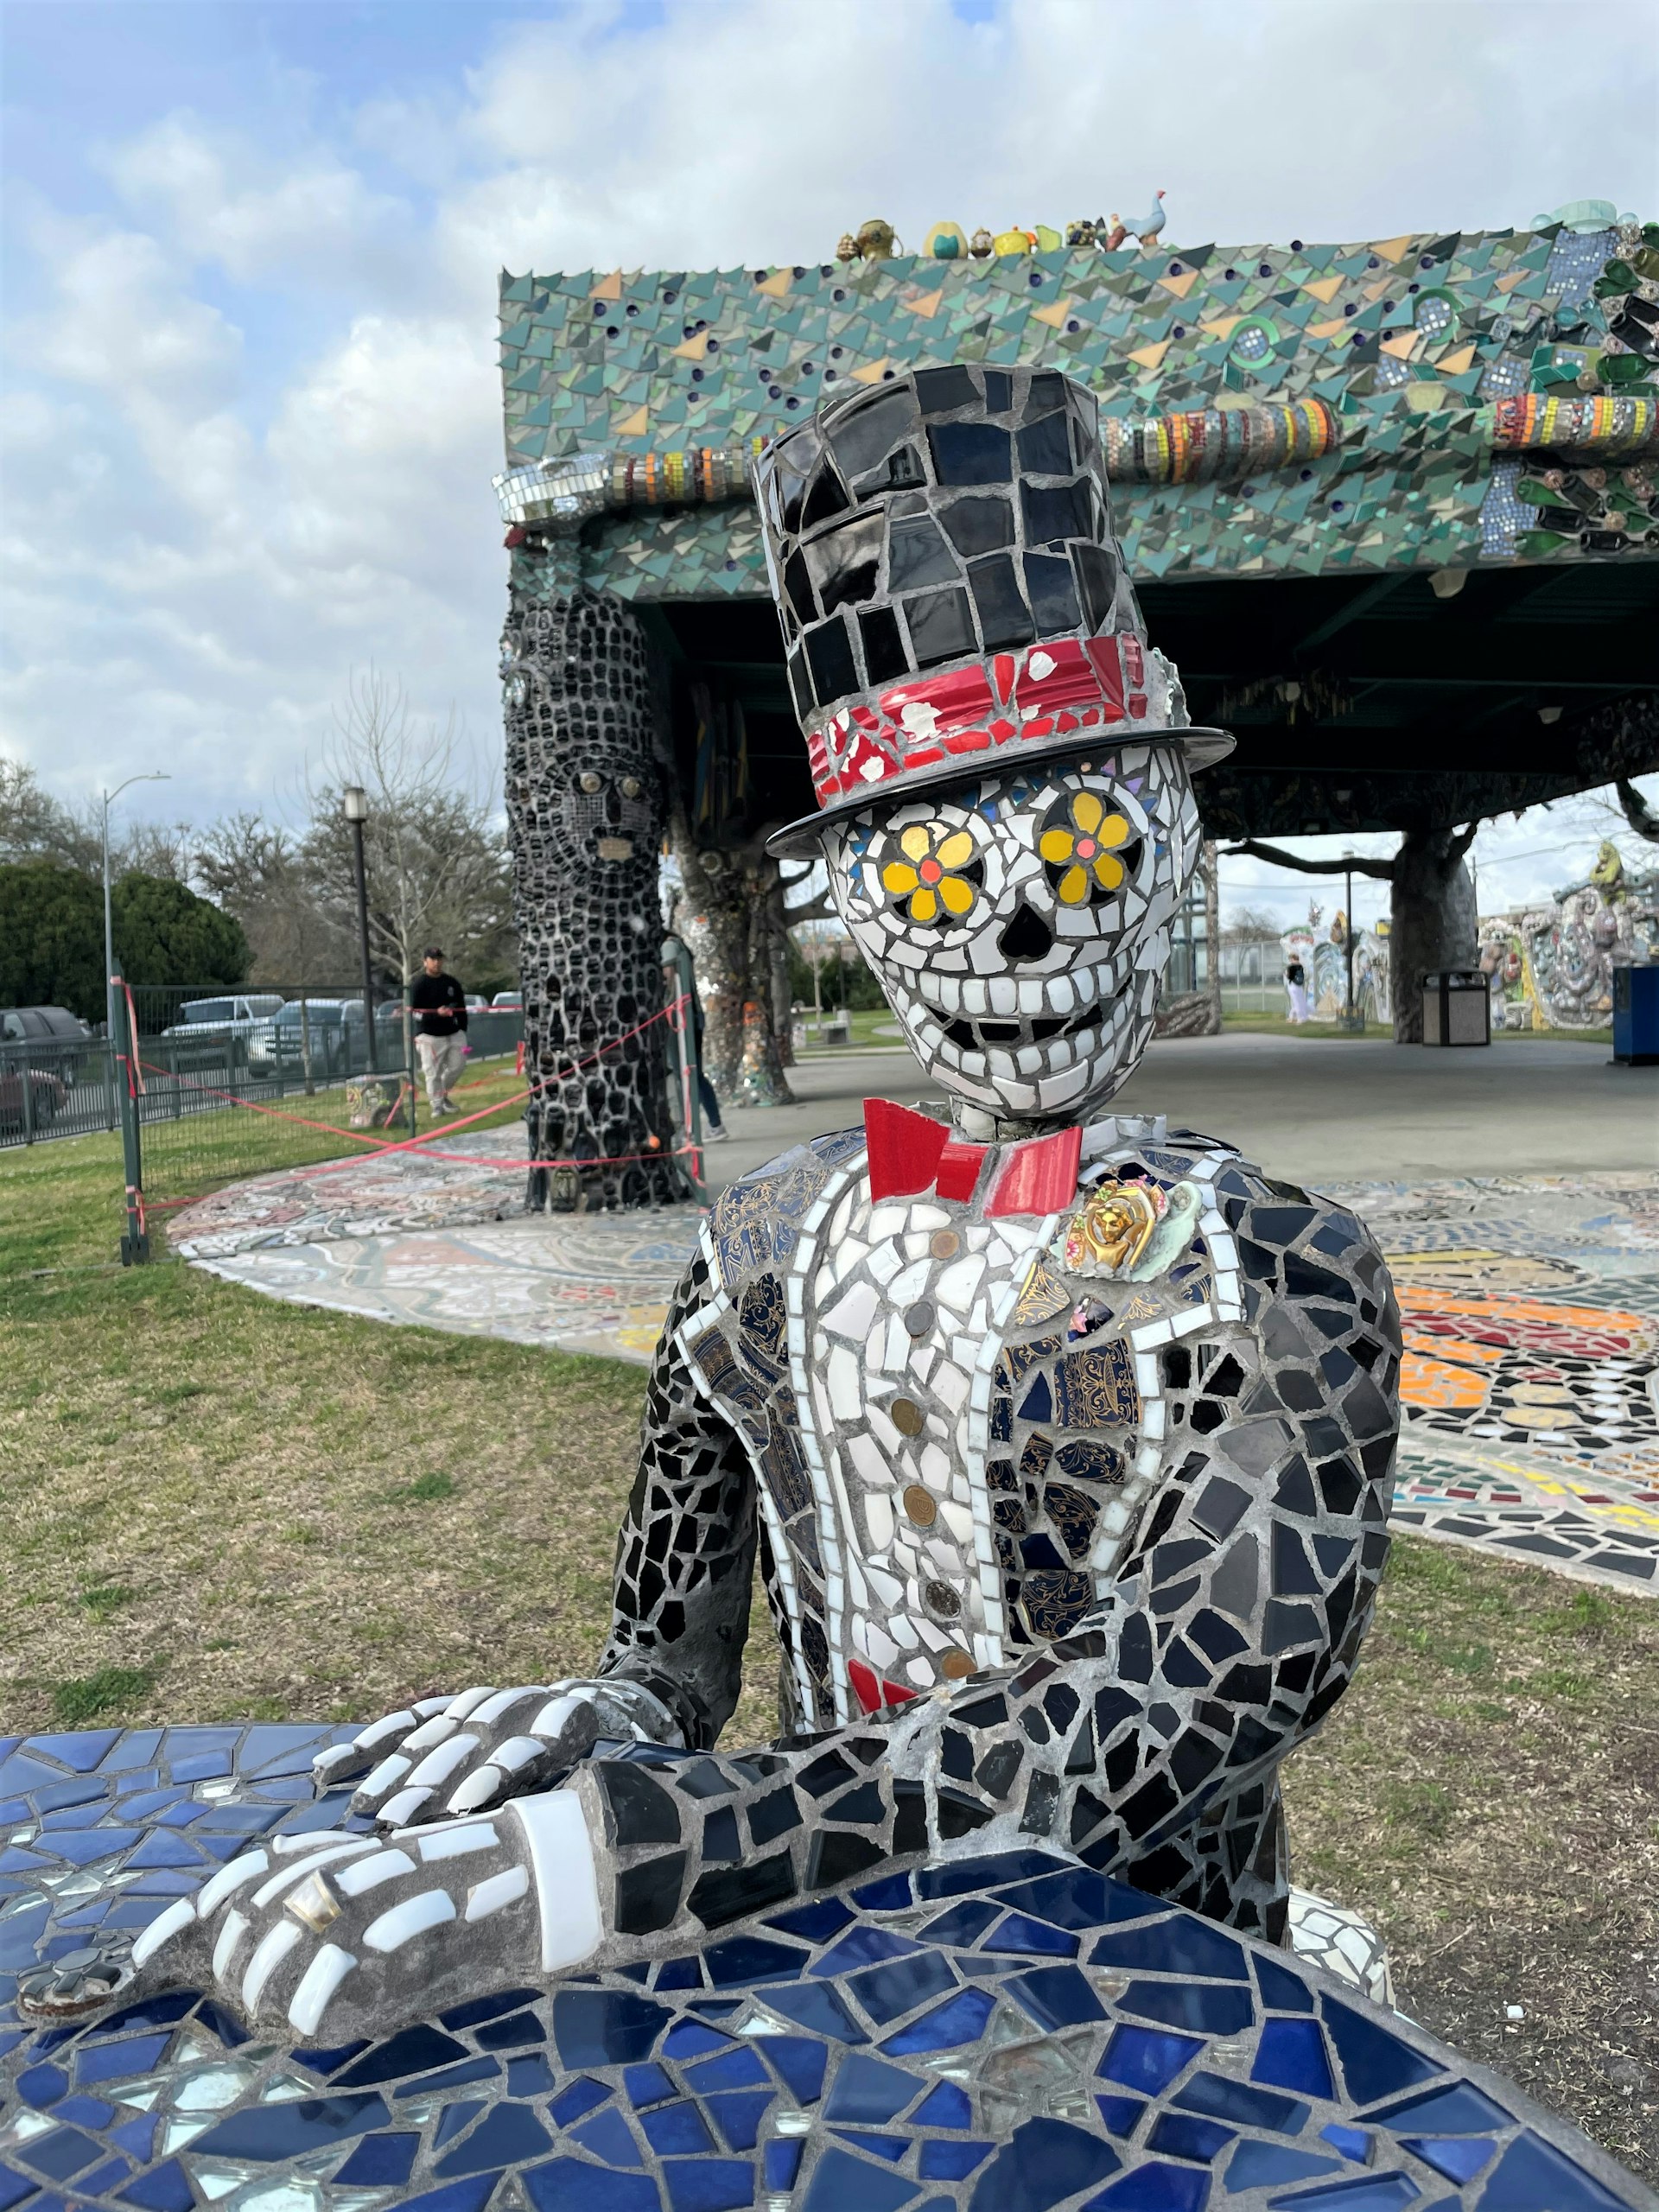 A colorful mosaic sculpture of a skeleton in a tuxedo